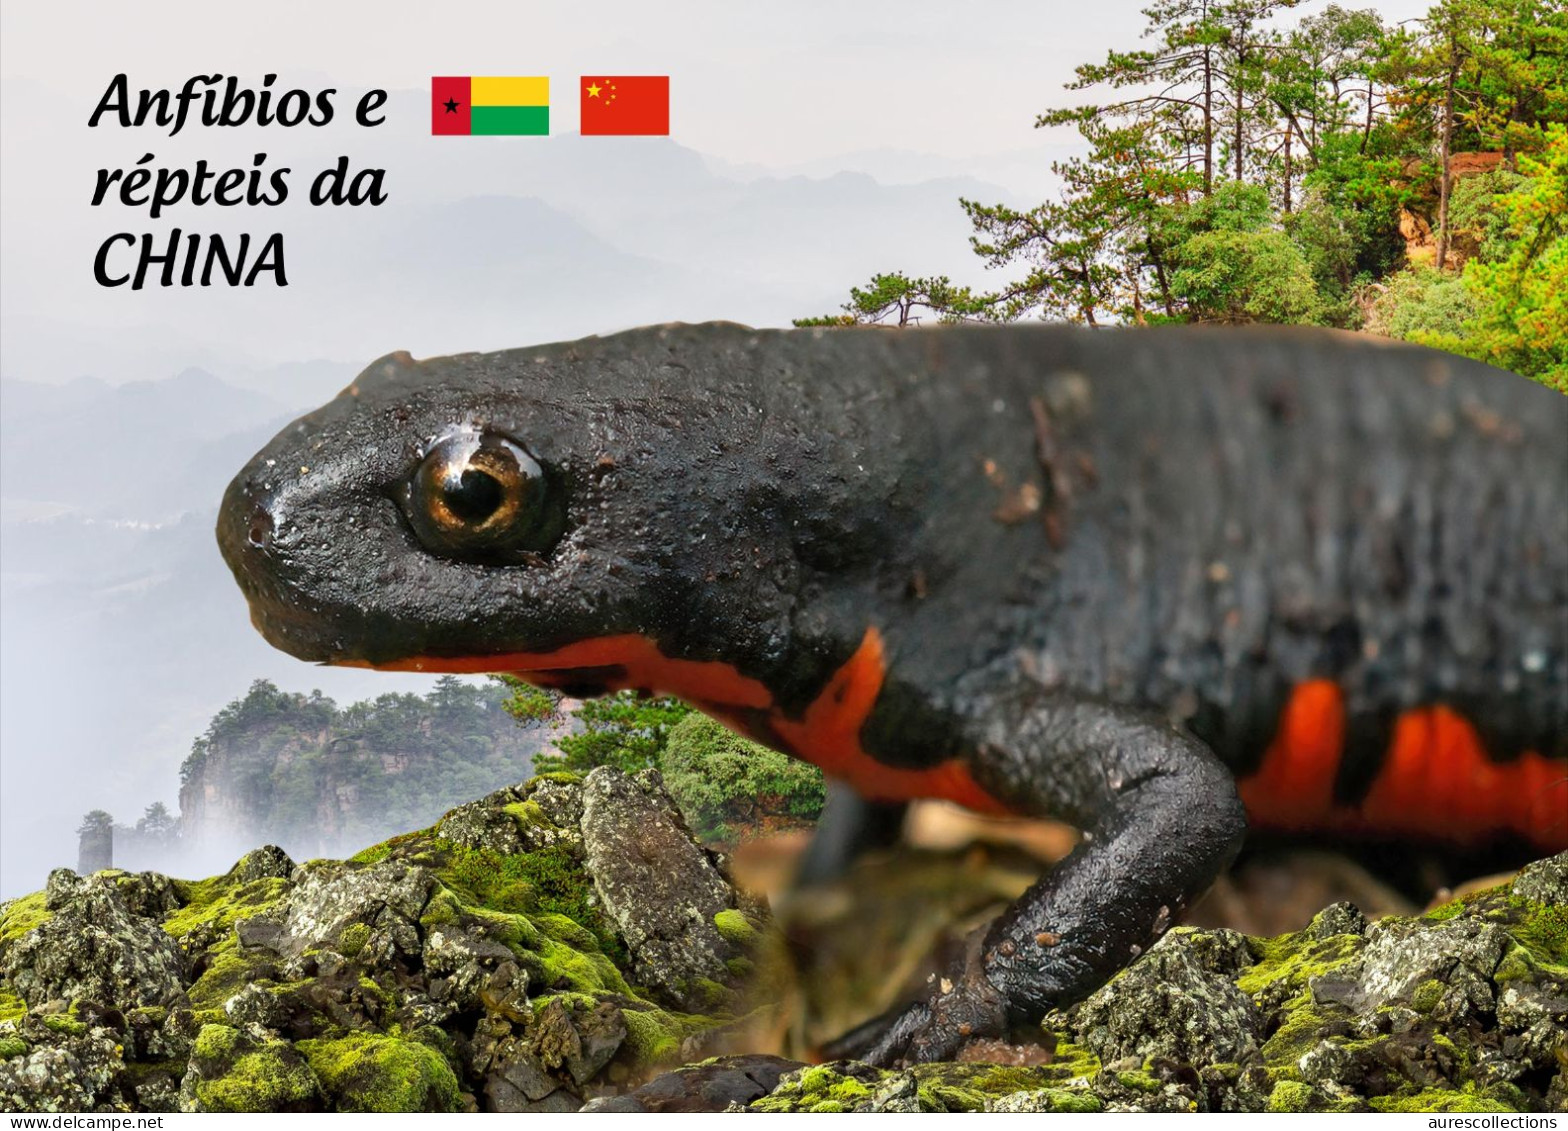 GUINEA BISSAU 2024 STATIONERY CARD 6V - CHINA AMPHIBIANS & REPTILES FROG FROGS TURTLE TURTLES SNAKES CROCODILE NEWT - Kikkers